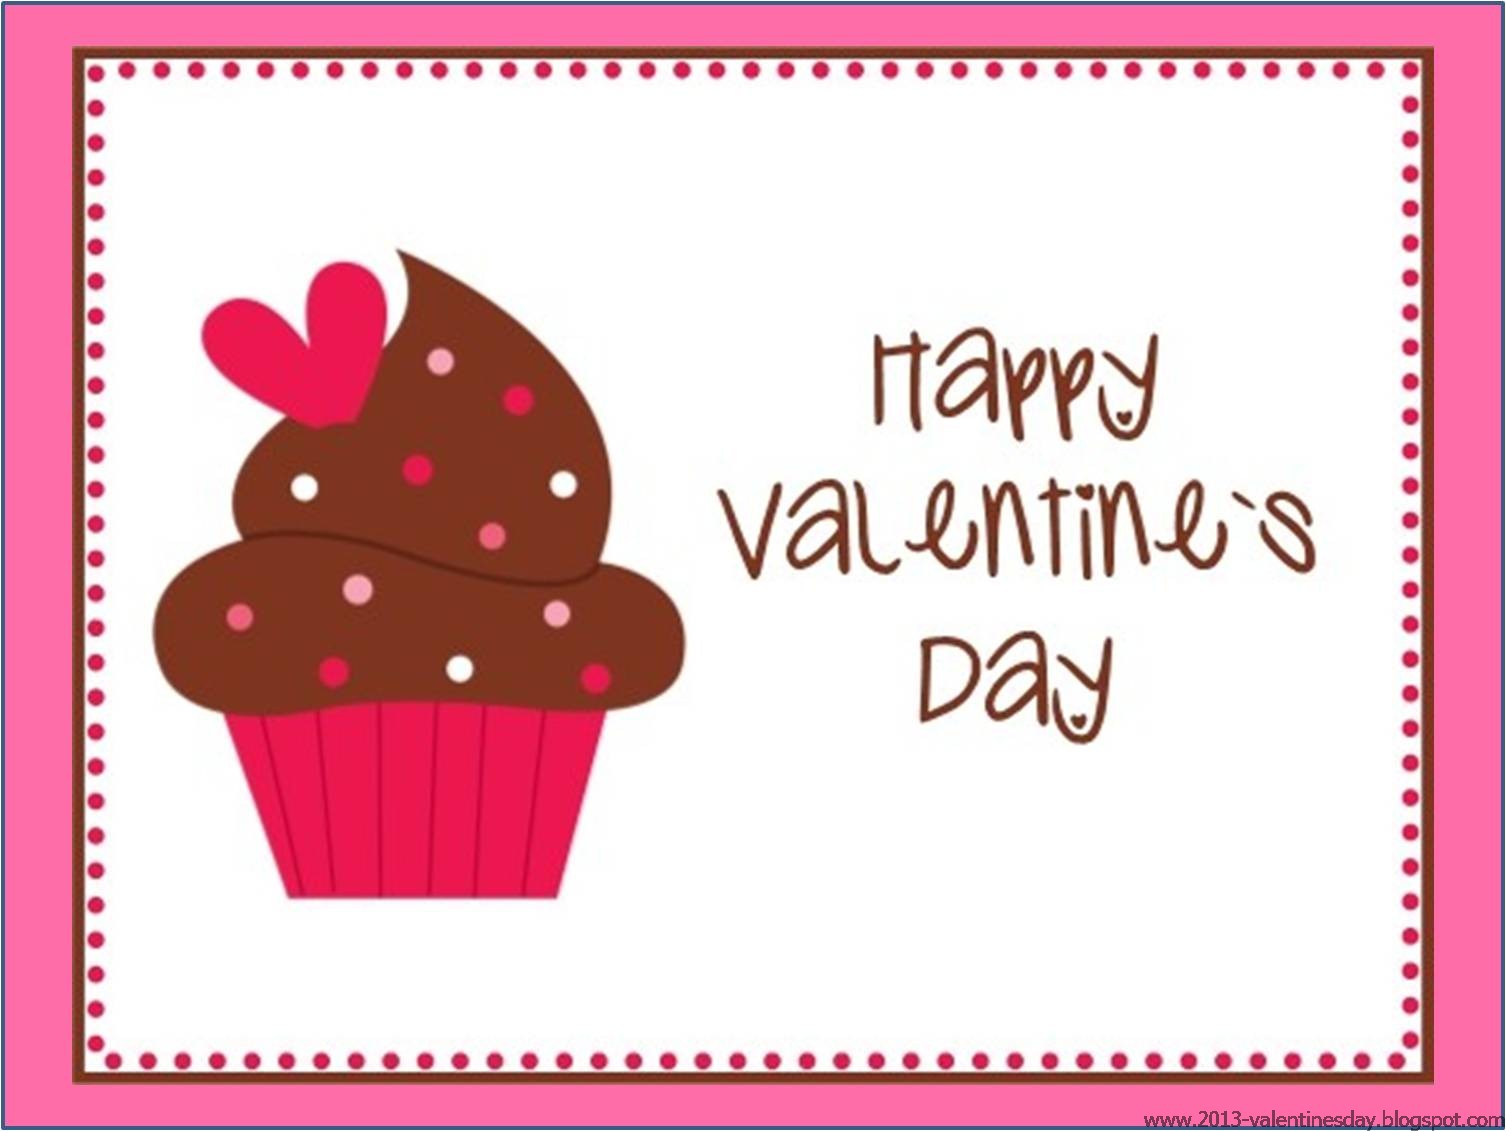 Image result for valentines day clip art